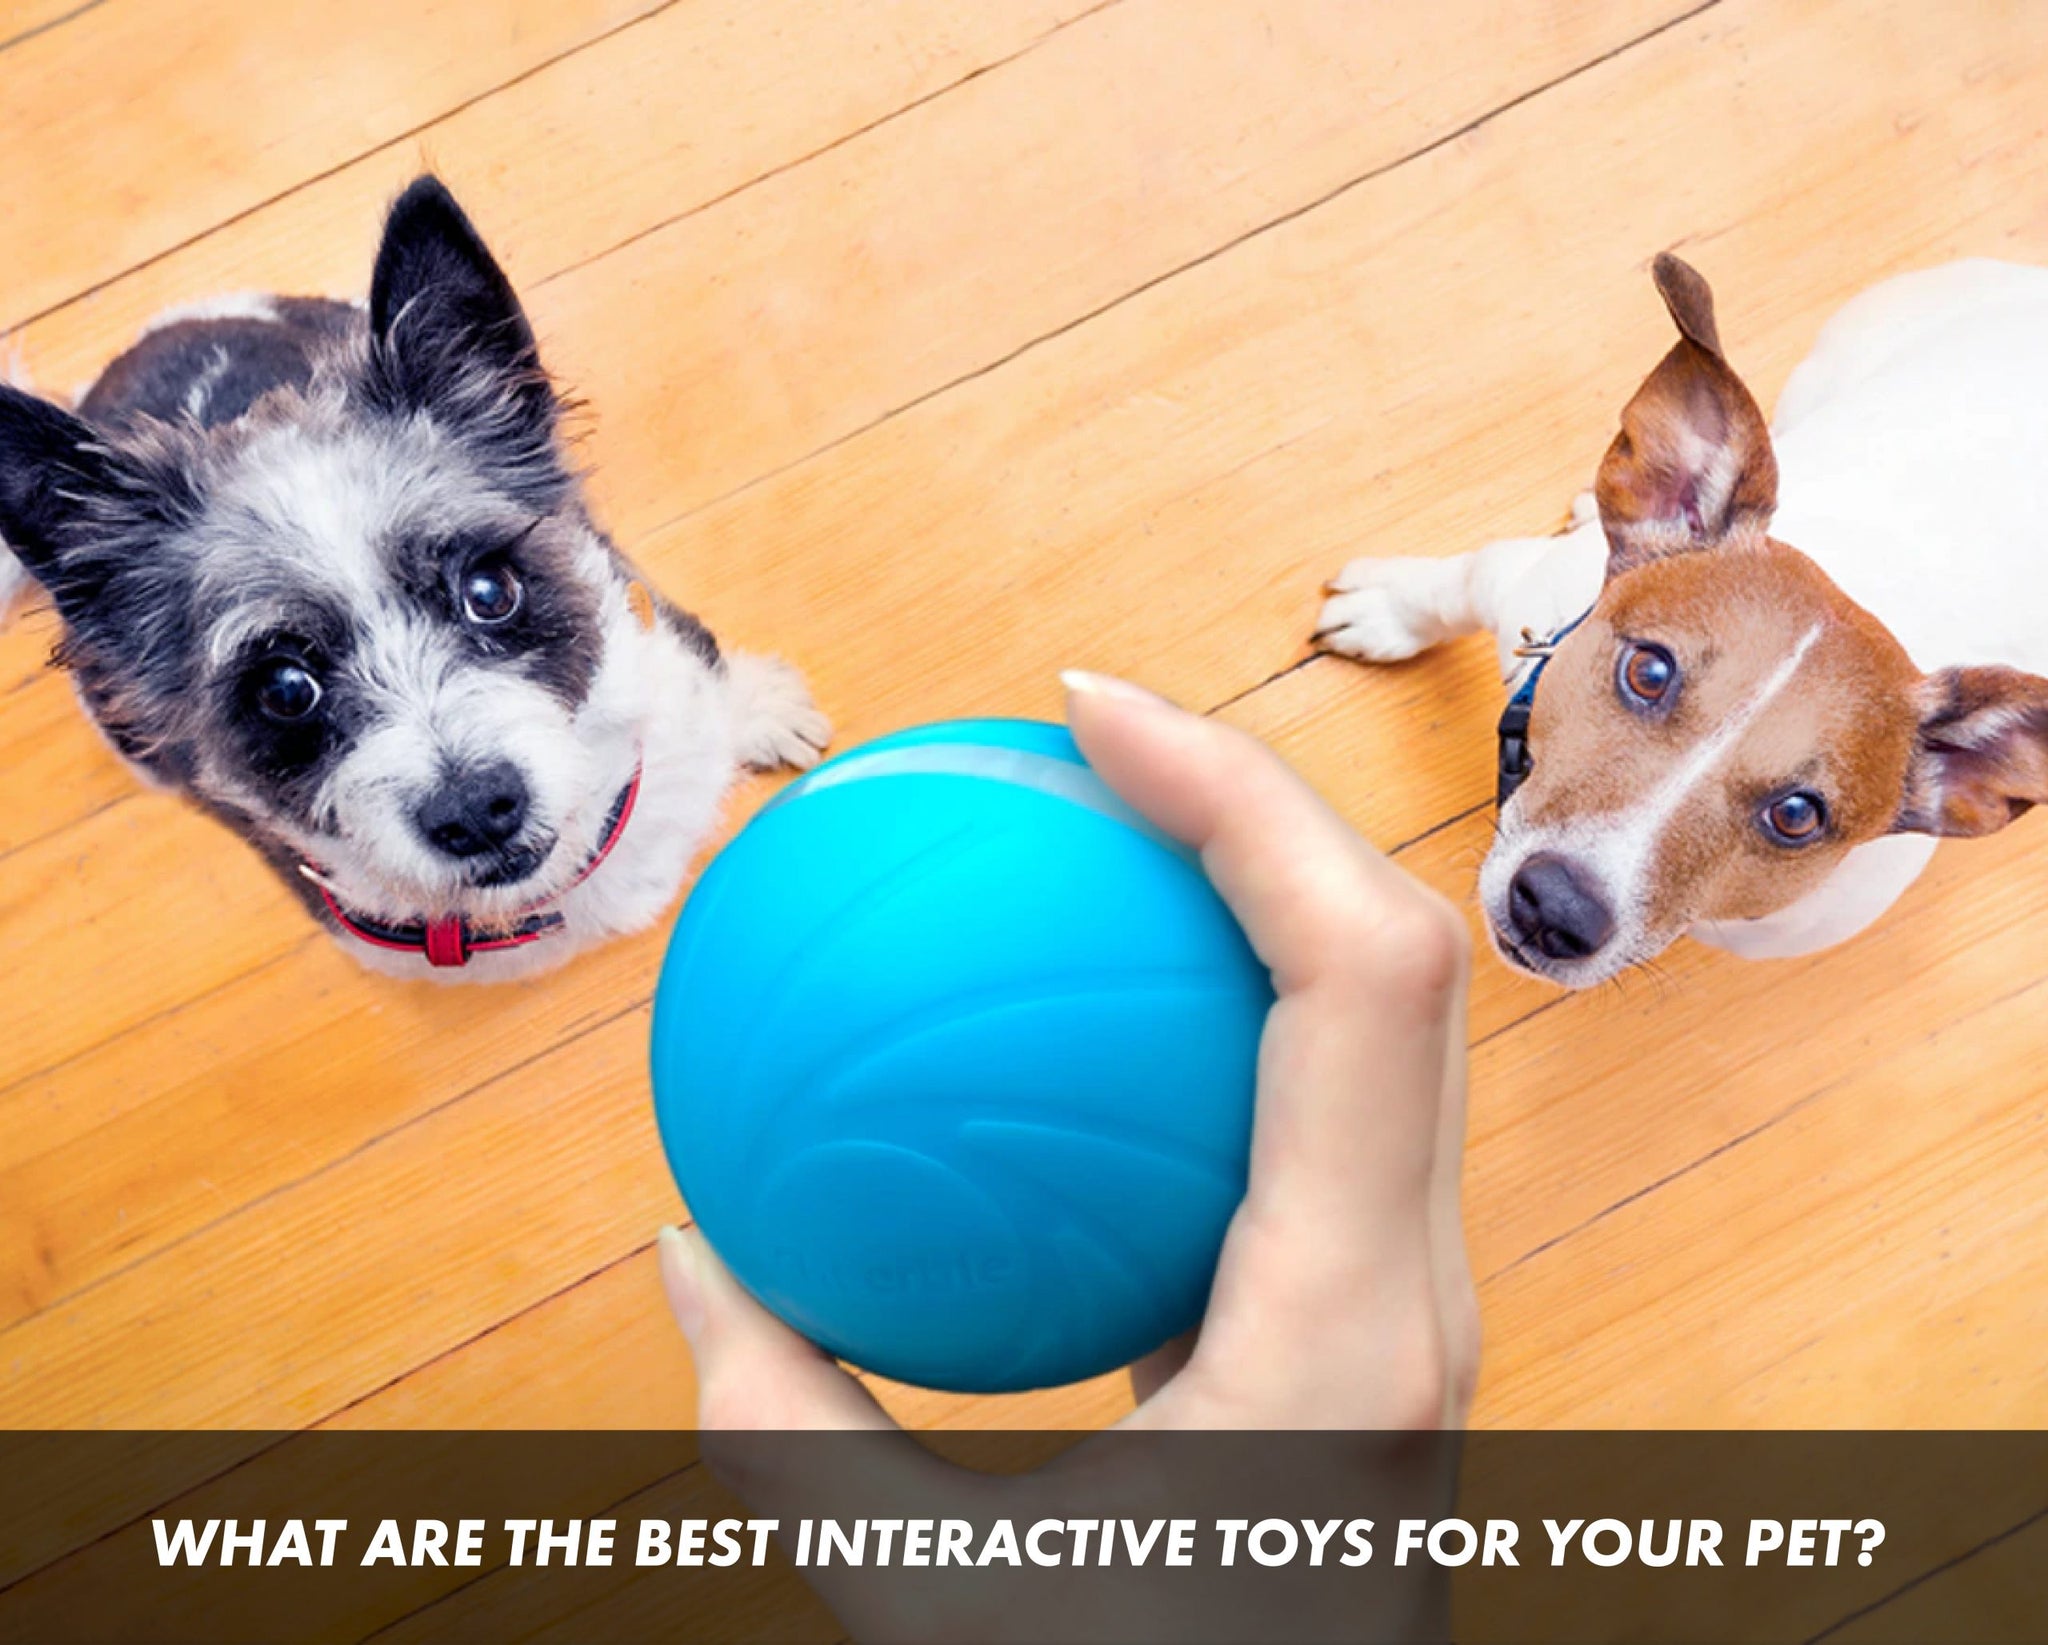 Pet Chew Smart Interactive Toys for Dogs and Cats App Control Pet